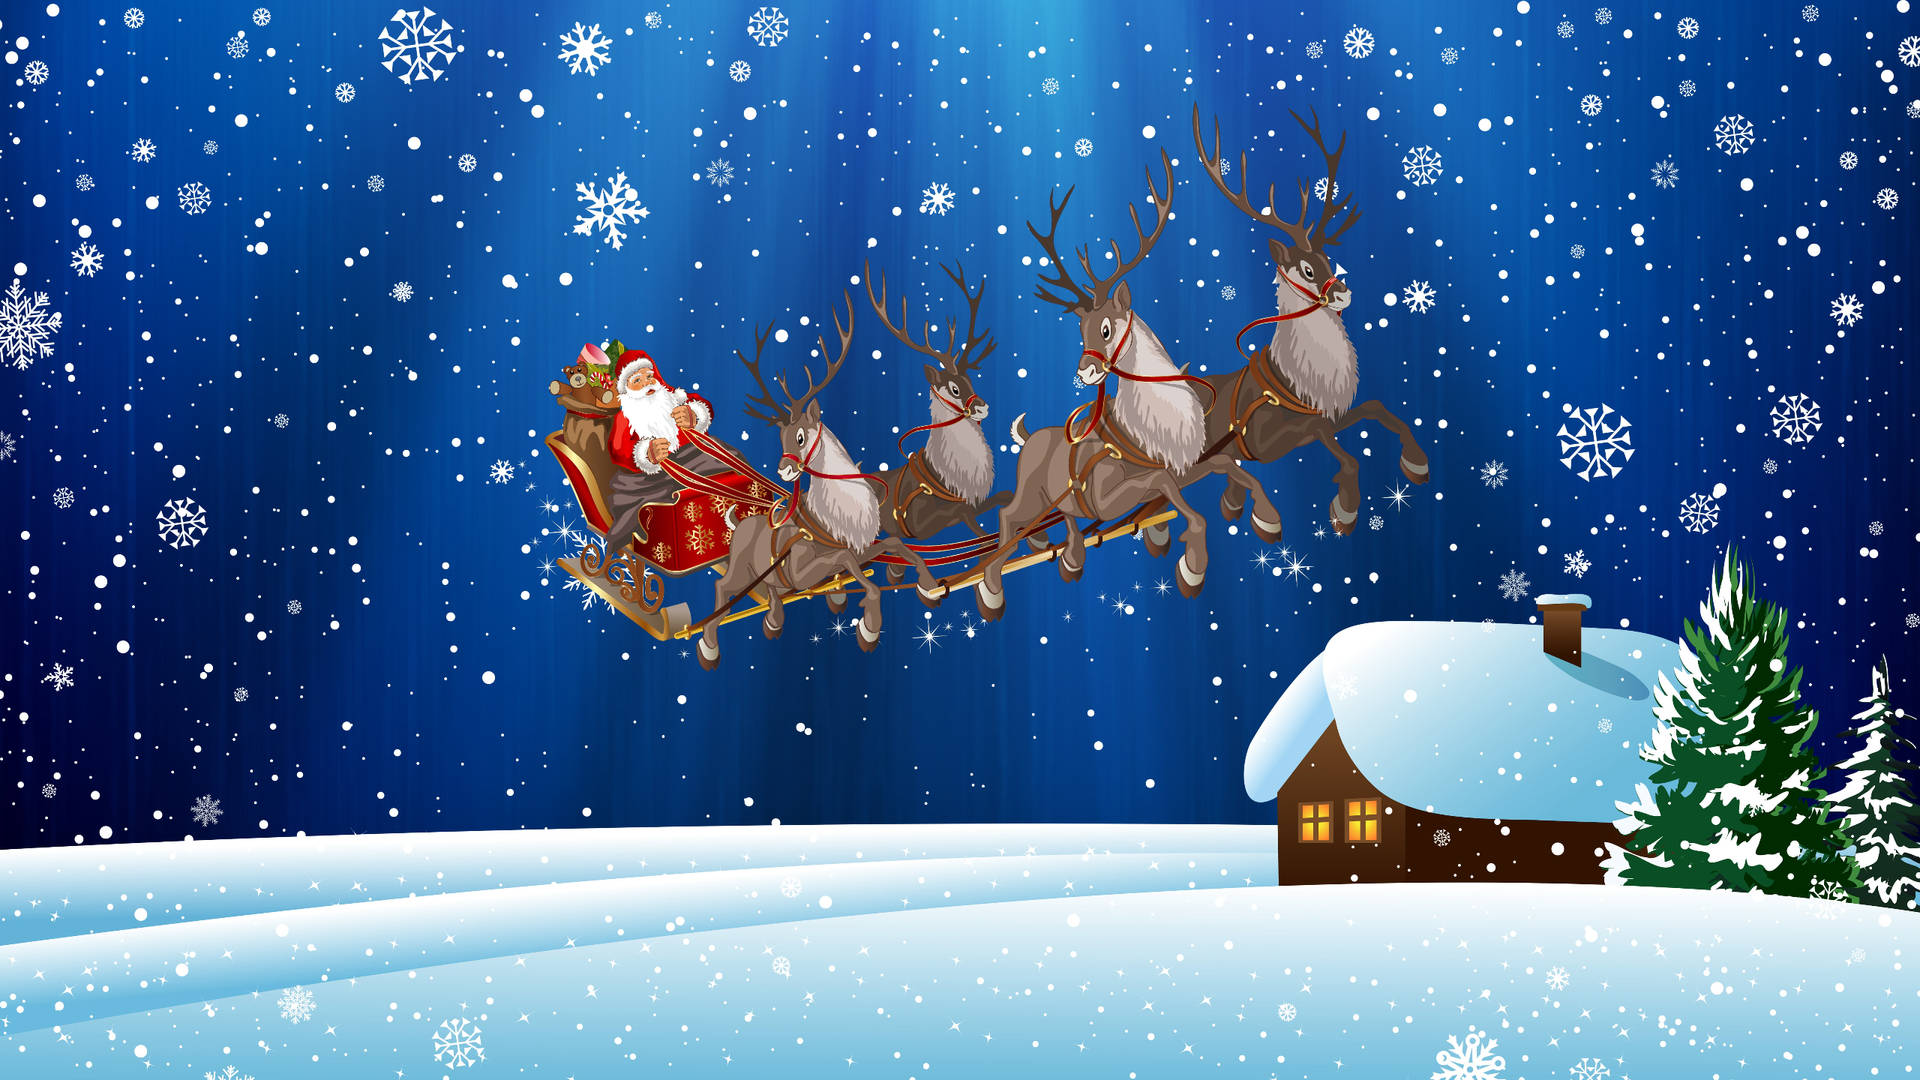 Santa Claus Flying With Reindeers Background